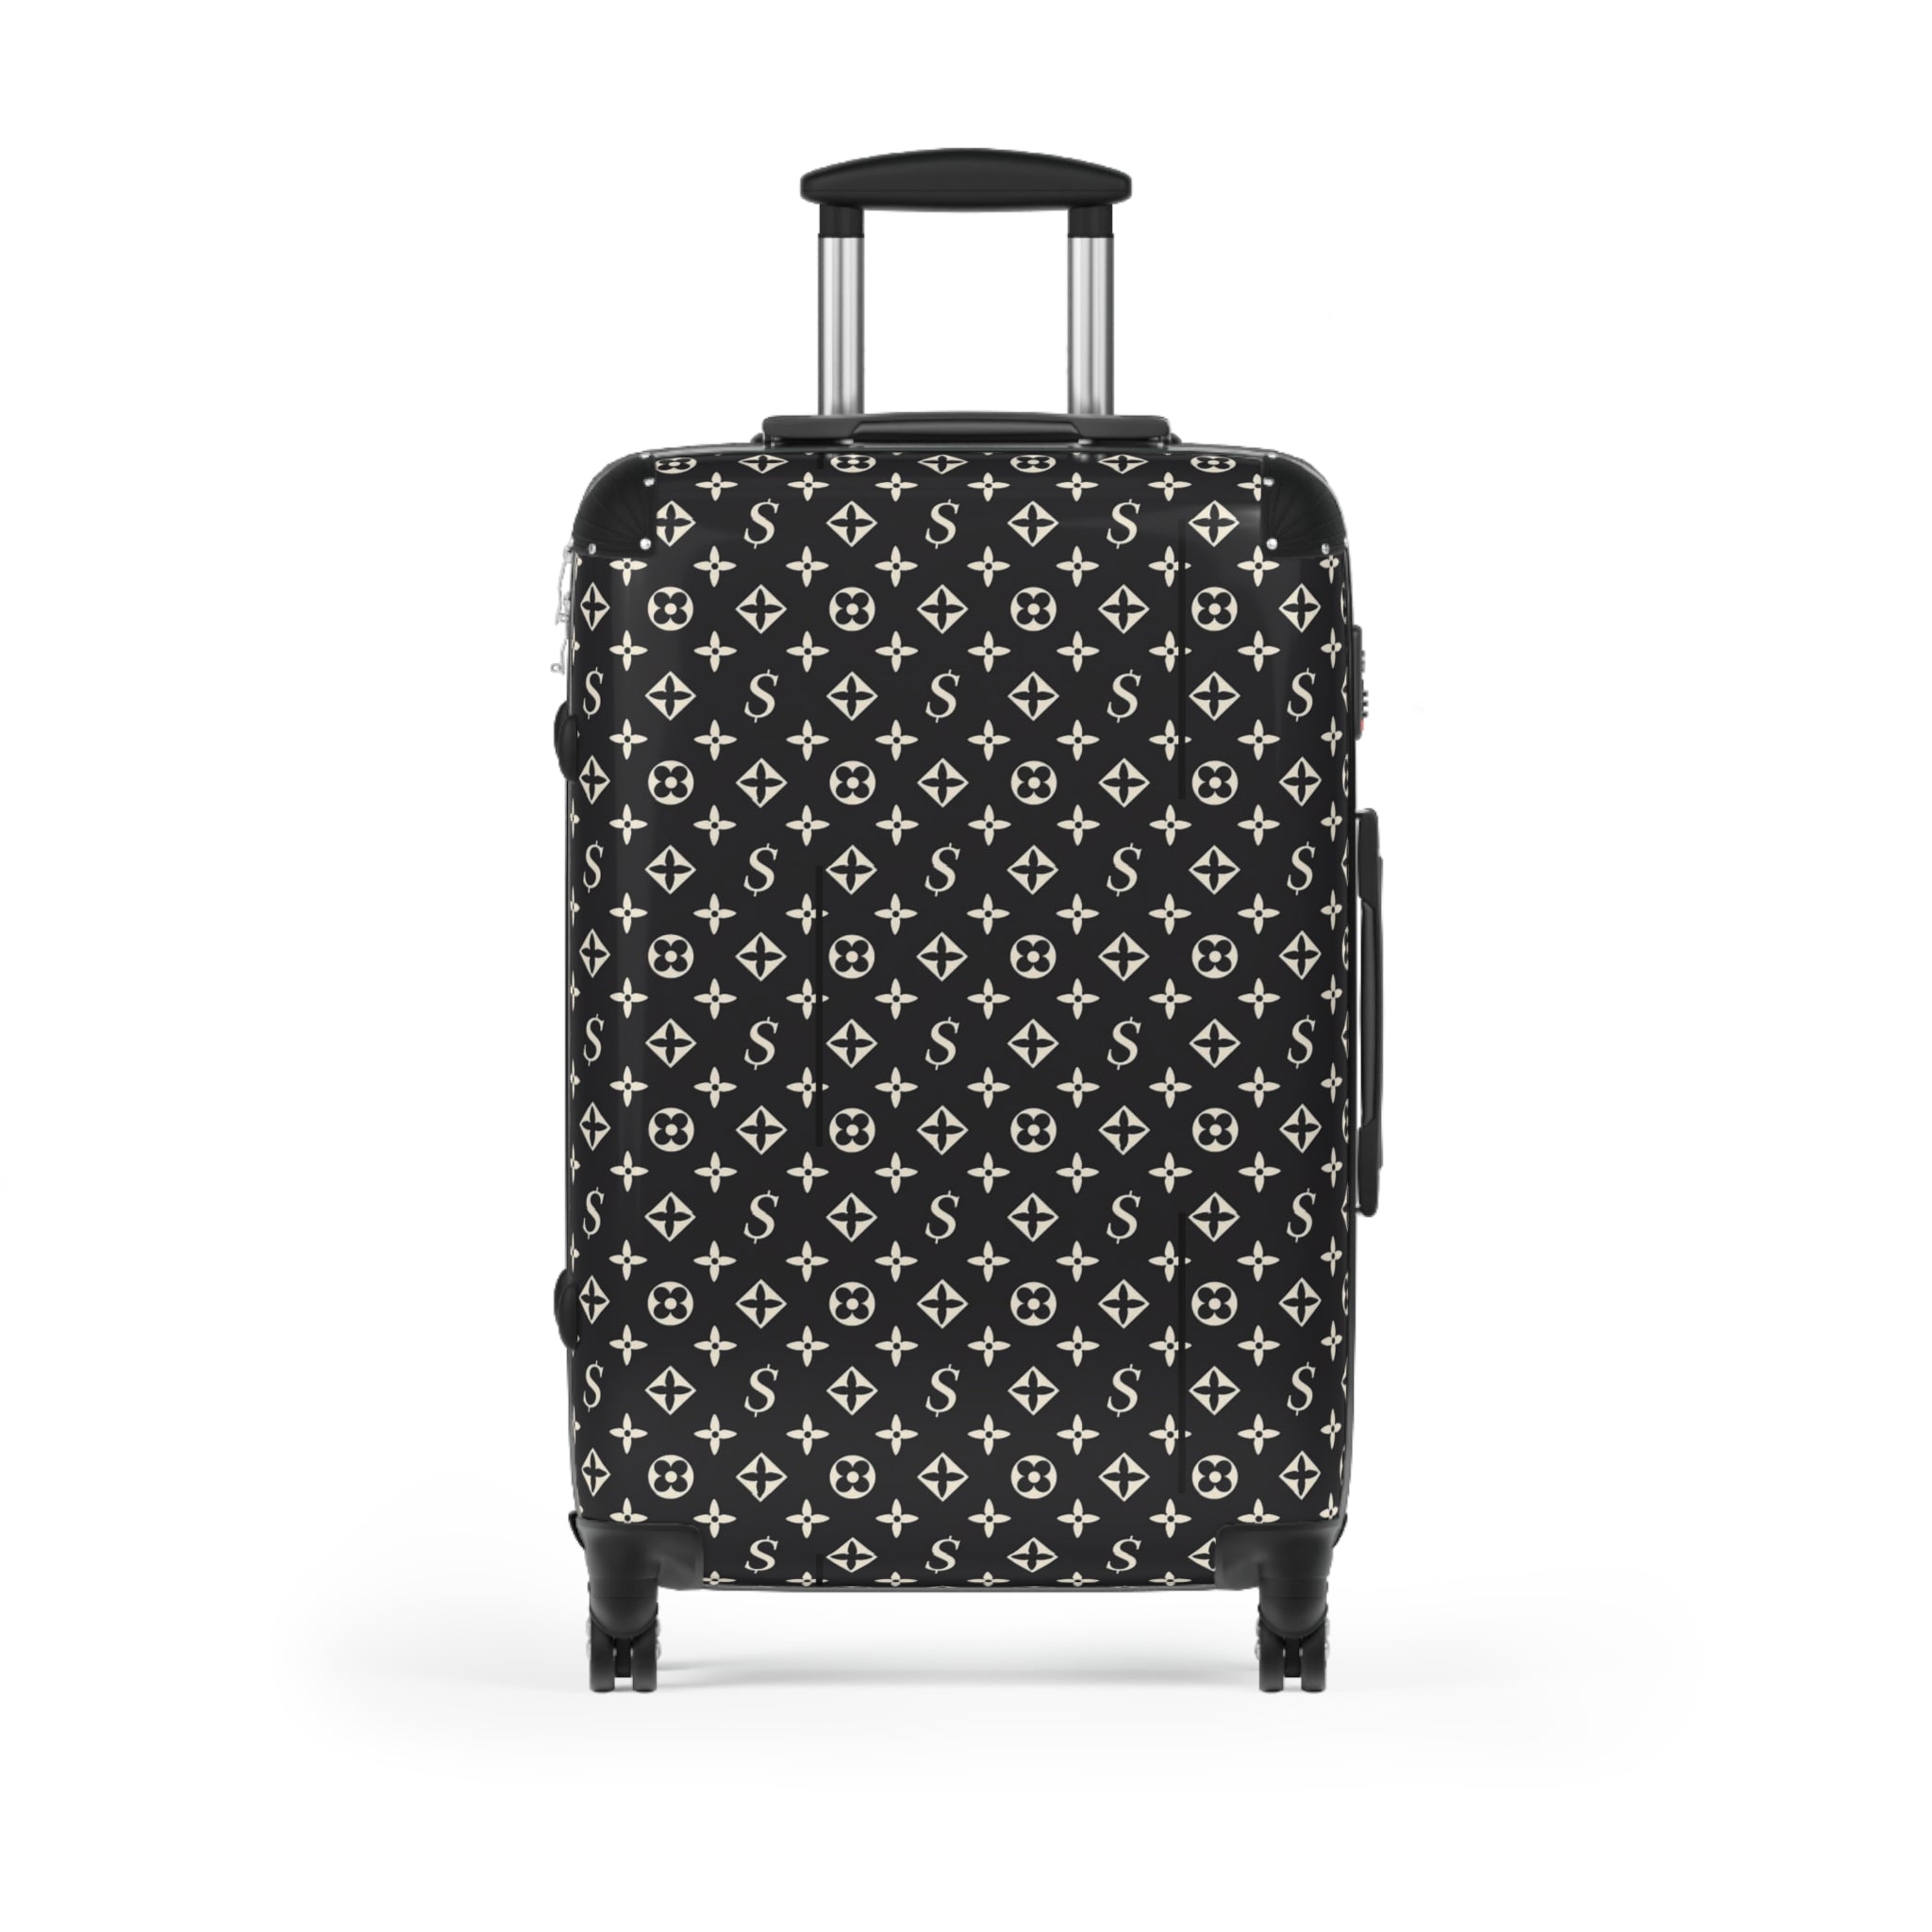 Abby Travel Collection Abby Travel Collection Black and White Icons Suitcase, Hard Shell Luggage, Rolling Suitcase for Travel, Carry On Bag Bags Medium-Black The Middle Aged Groove